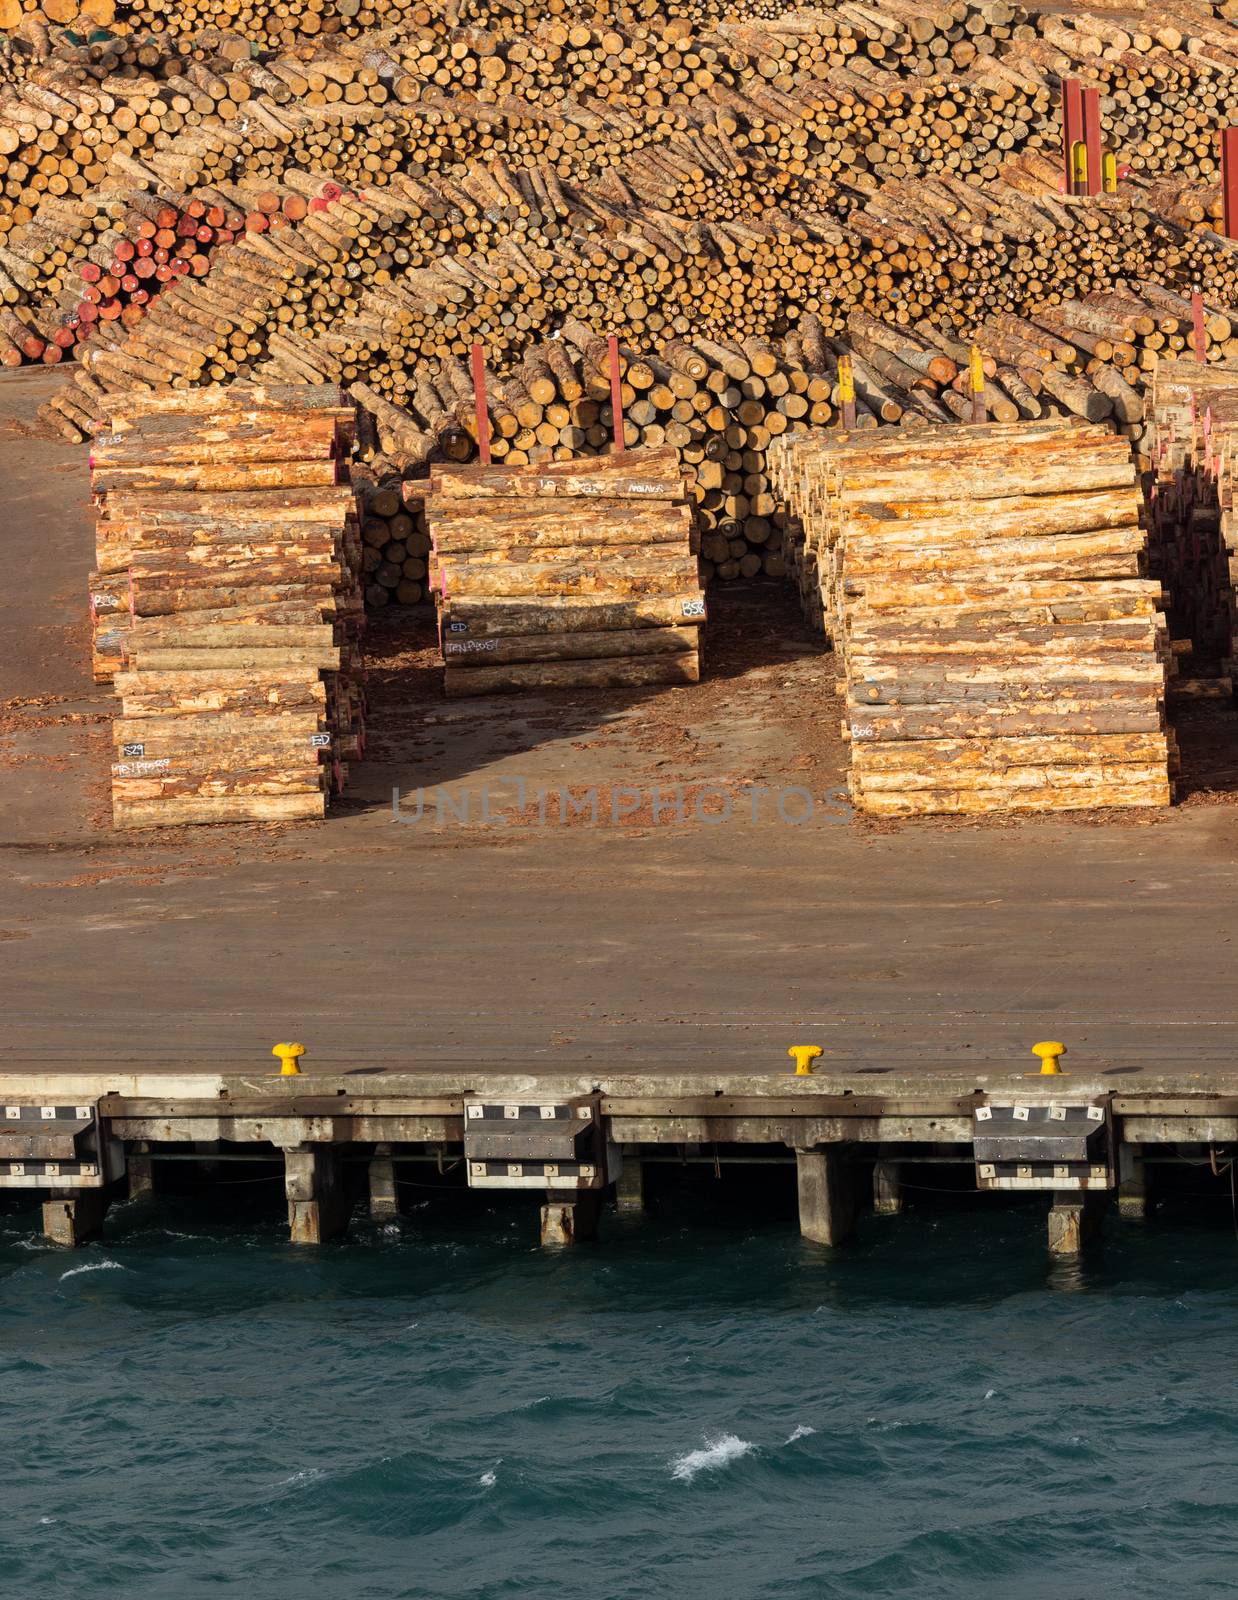 Piles of cut tree logs and trunks on wharf of Wellington Harbour in New Zealand ready for export